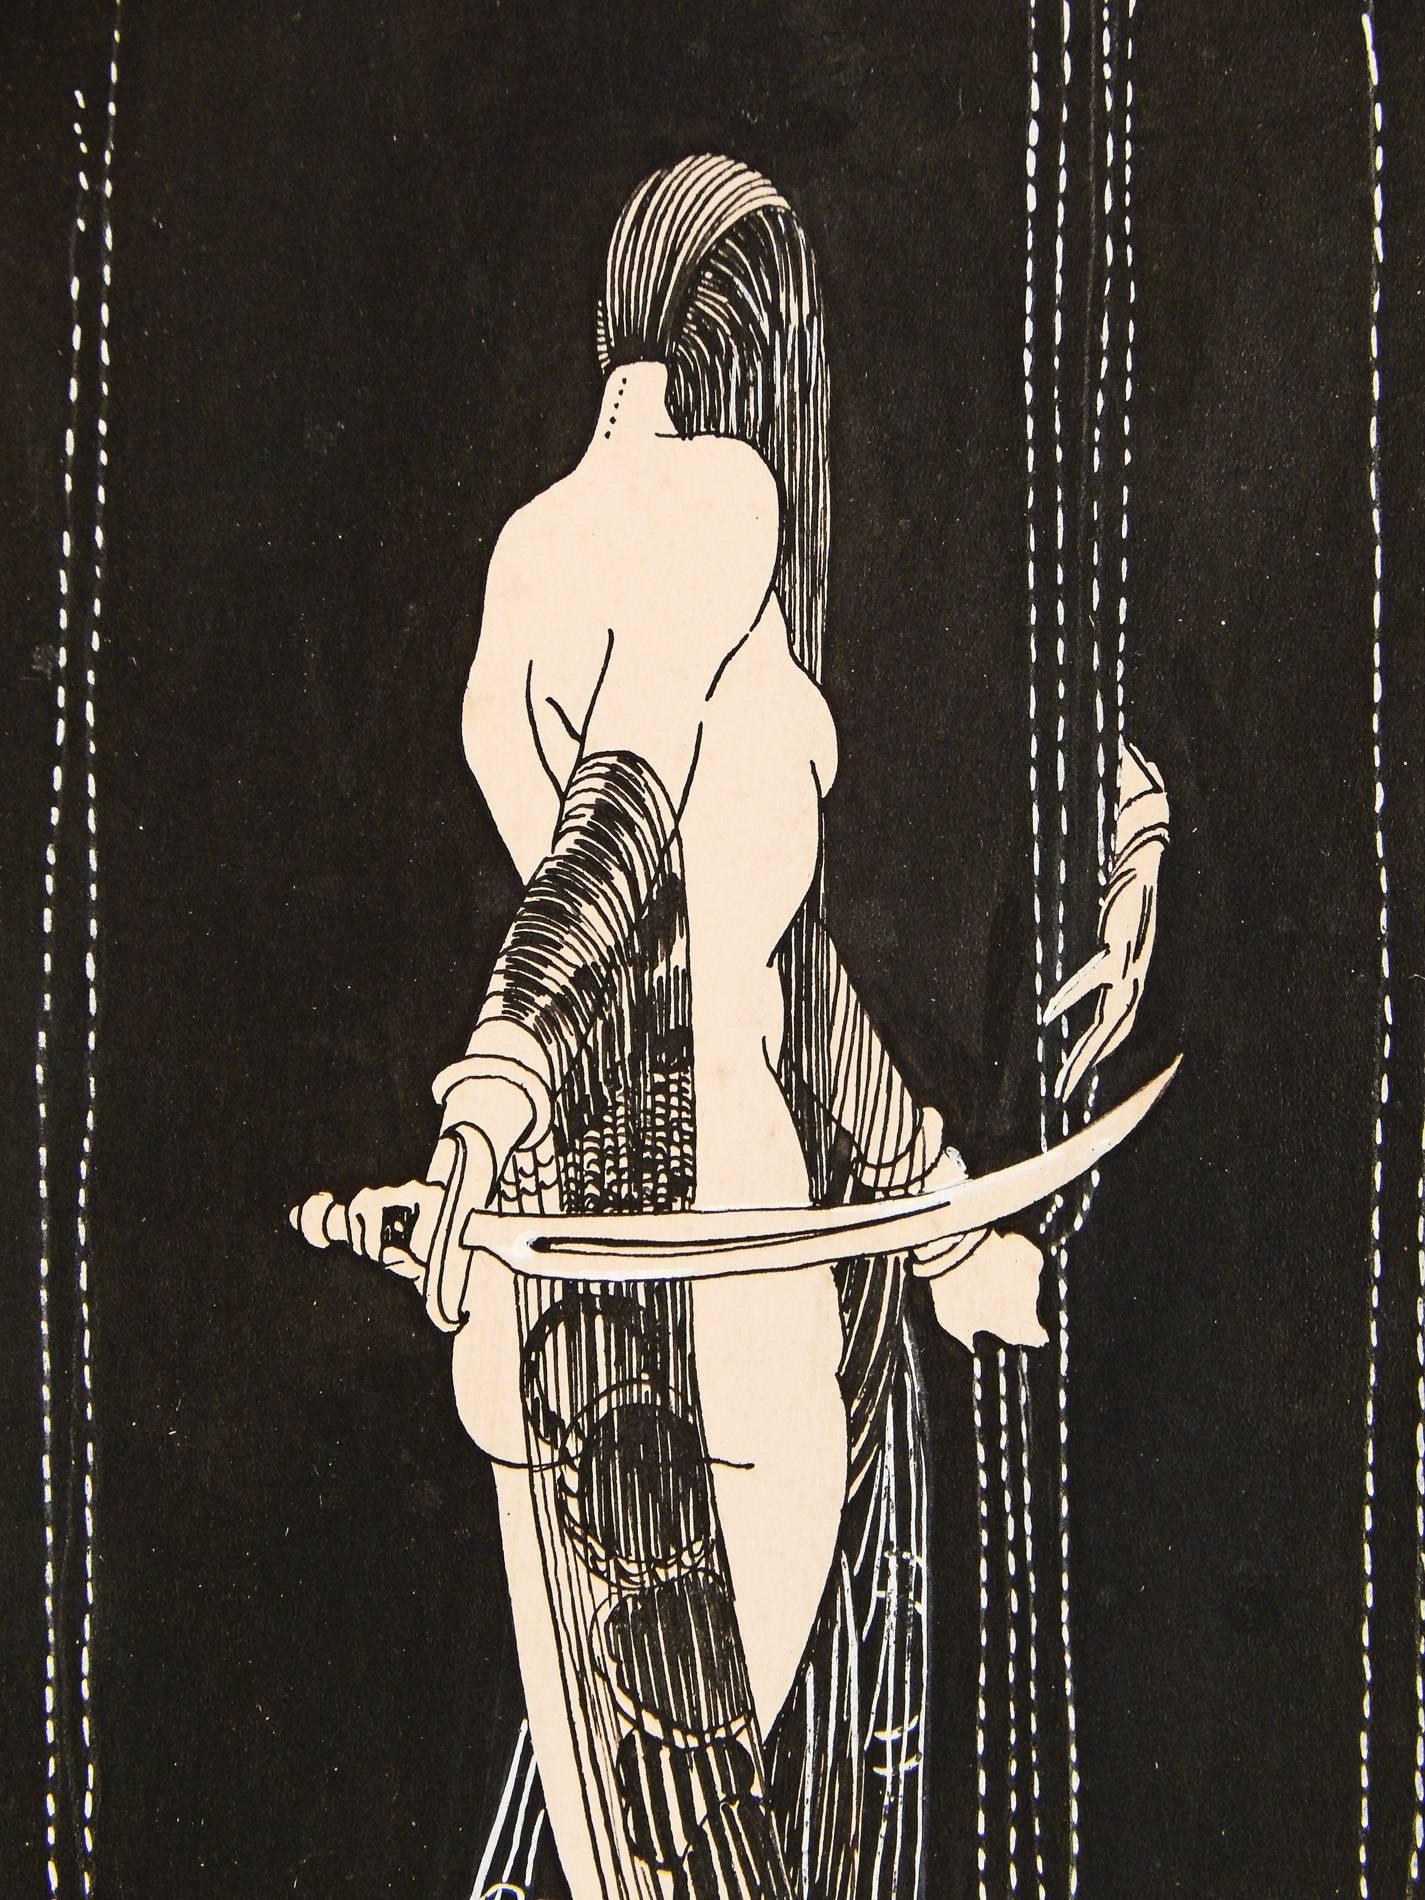 Full of drama and intrigue, both sensual and classical, this depiction of a female nude tiptoeing toward a curtain being pulled aside by a threatening, unseen figure, has all the nocturnal drama of a scene by Aubrey Beardsley or Erte. The female